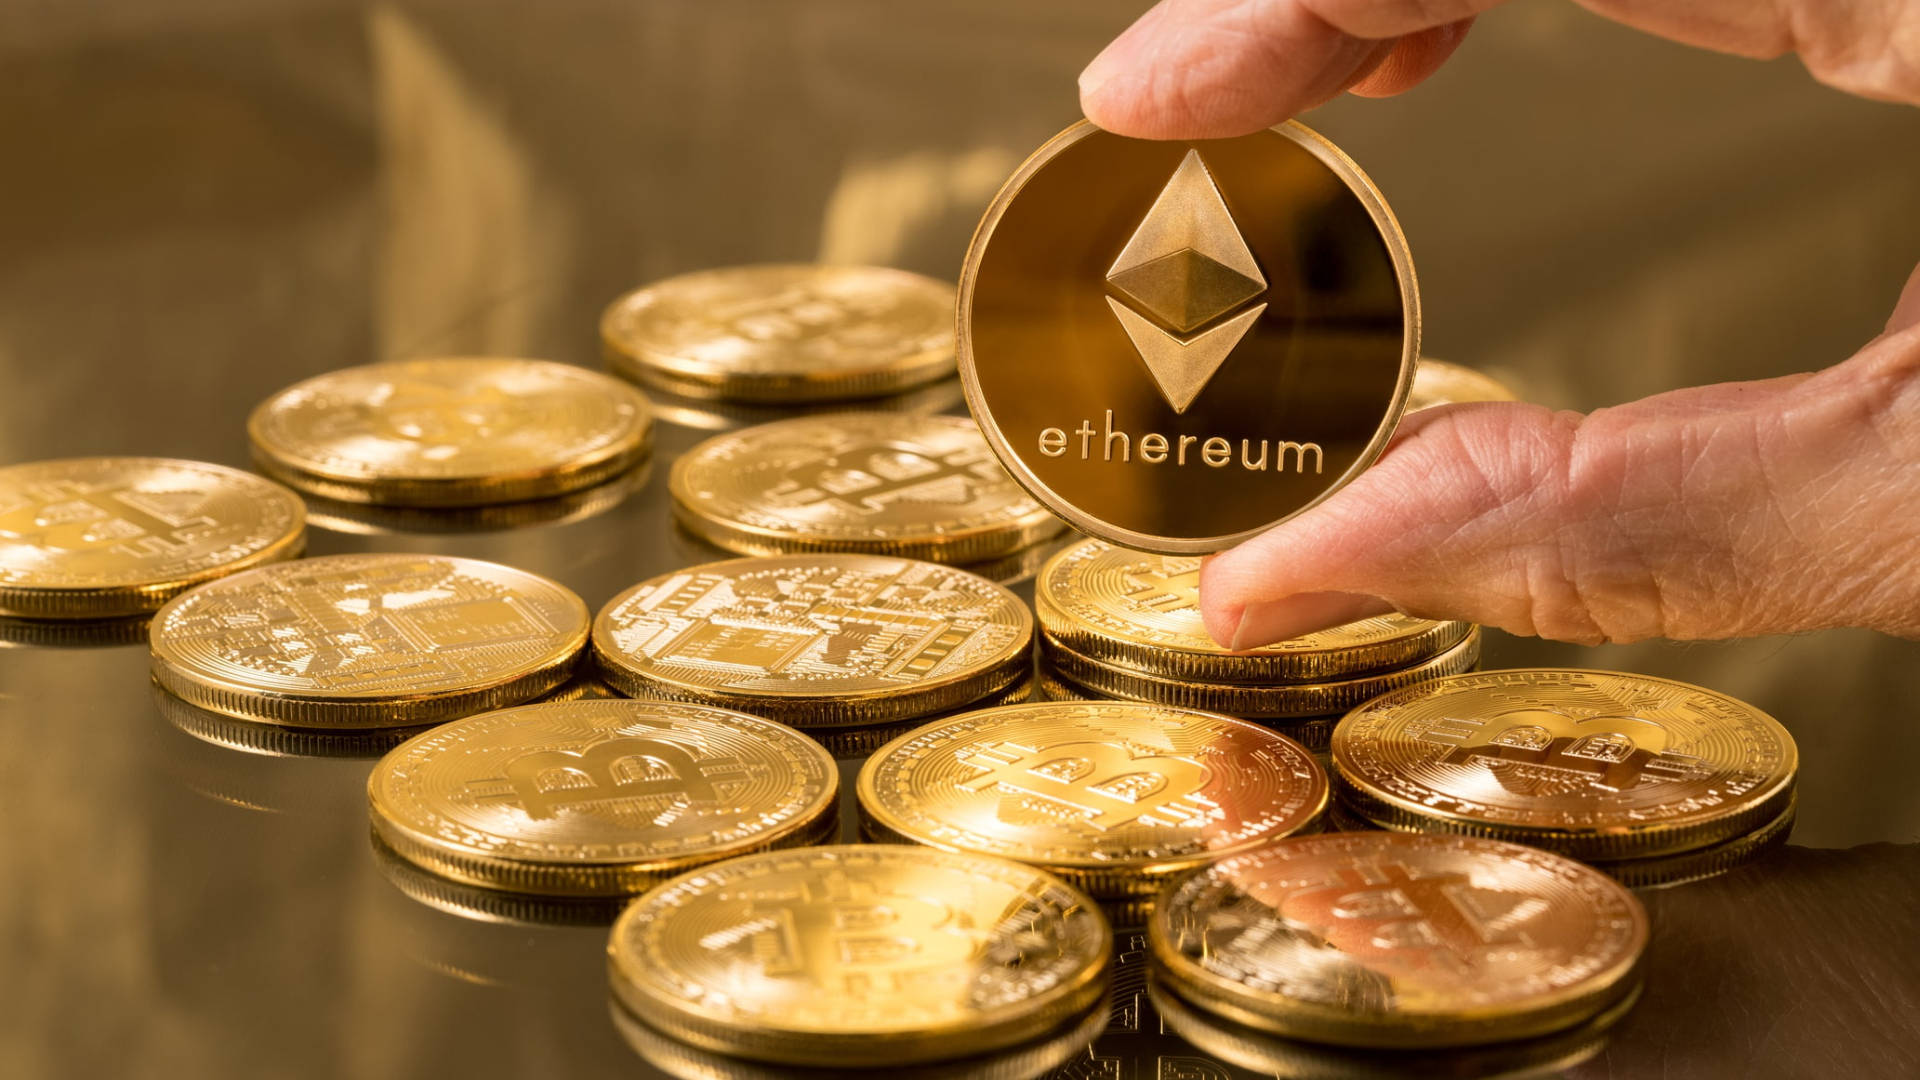 Hand Holding Ethereum Gold Coin